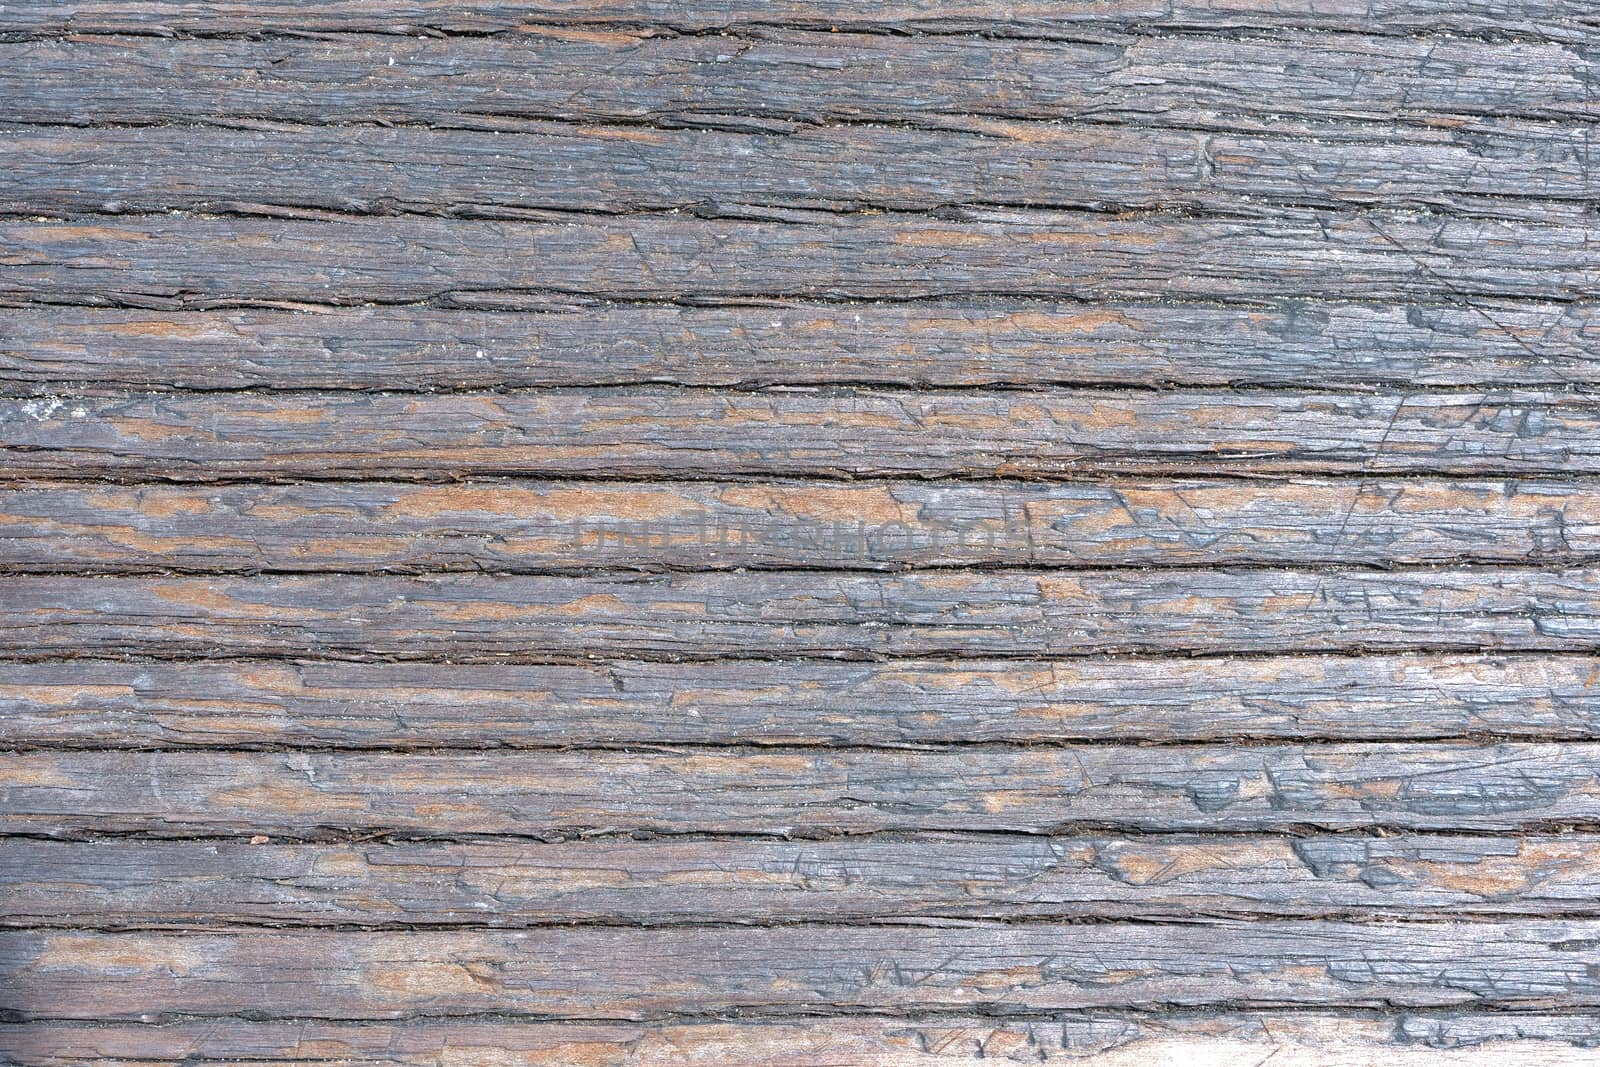 Closeup detail of old weathered and splintered wood showing deep grain and grains of sand and dirt